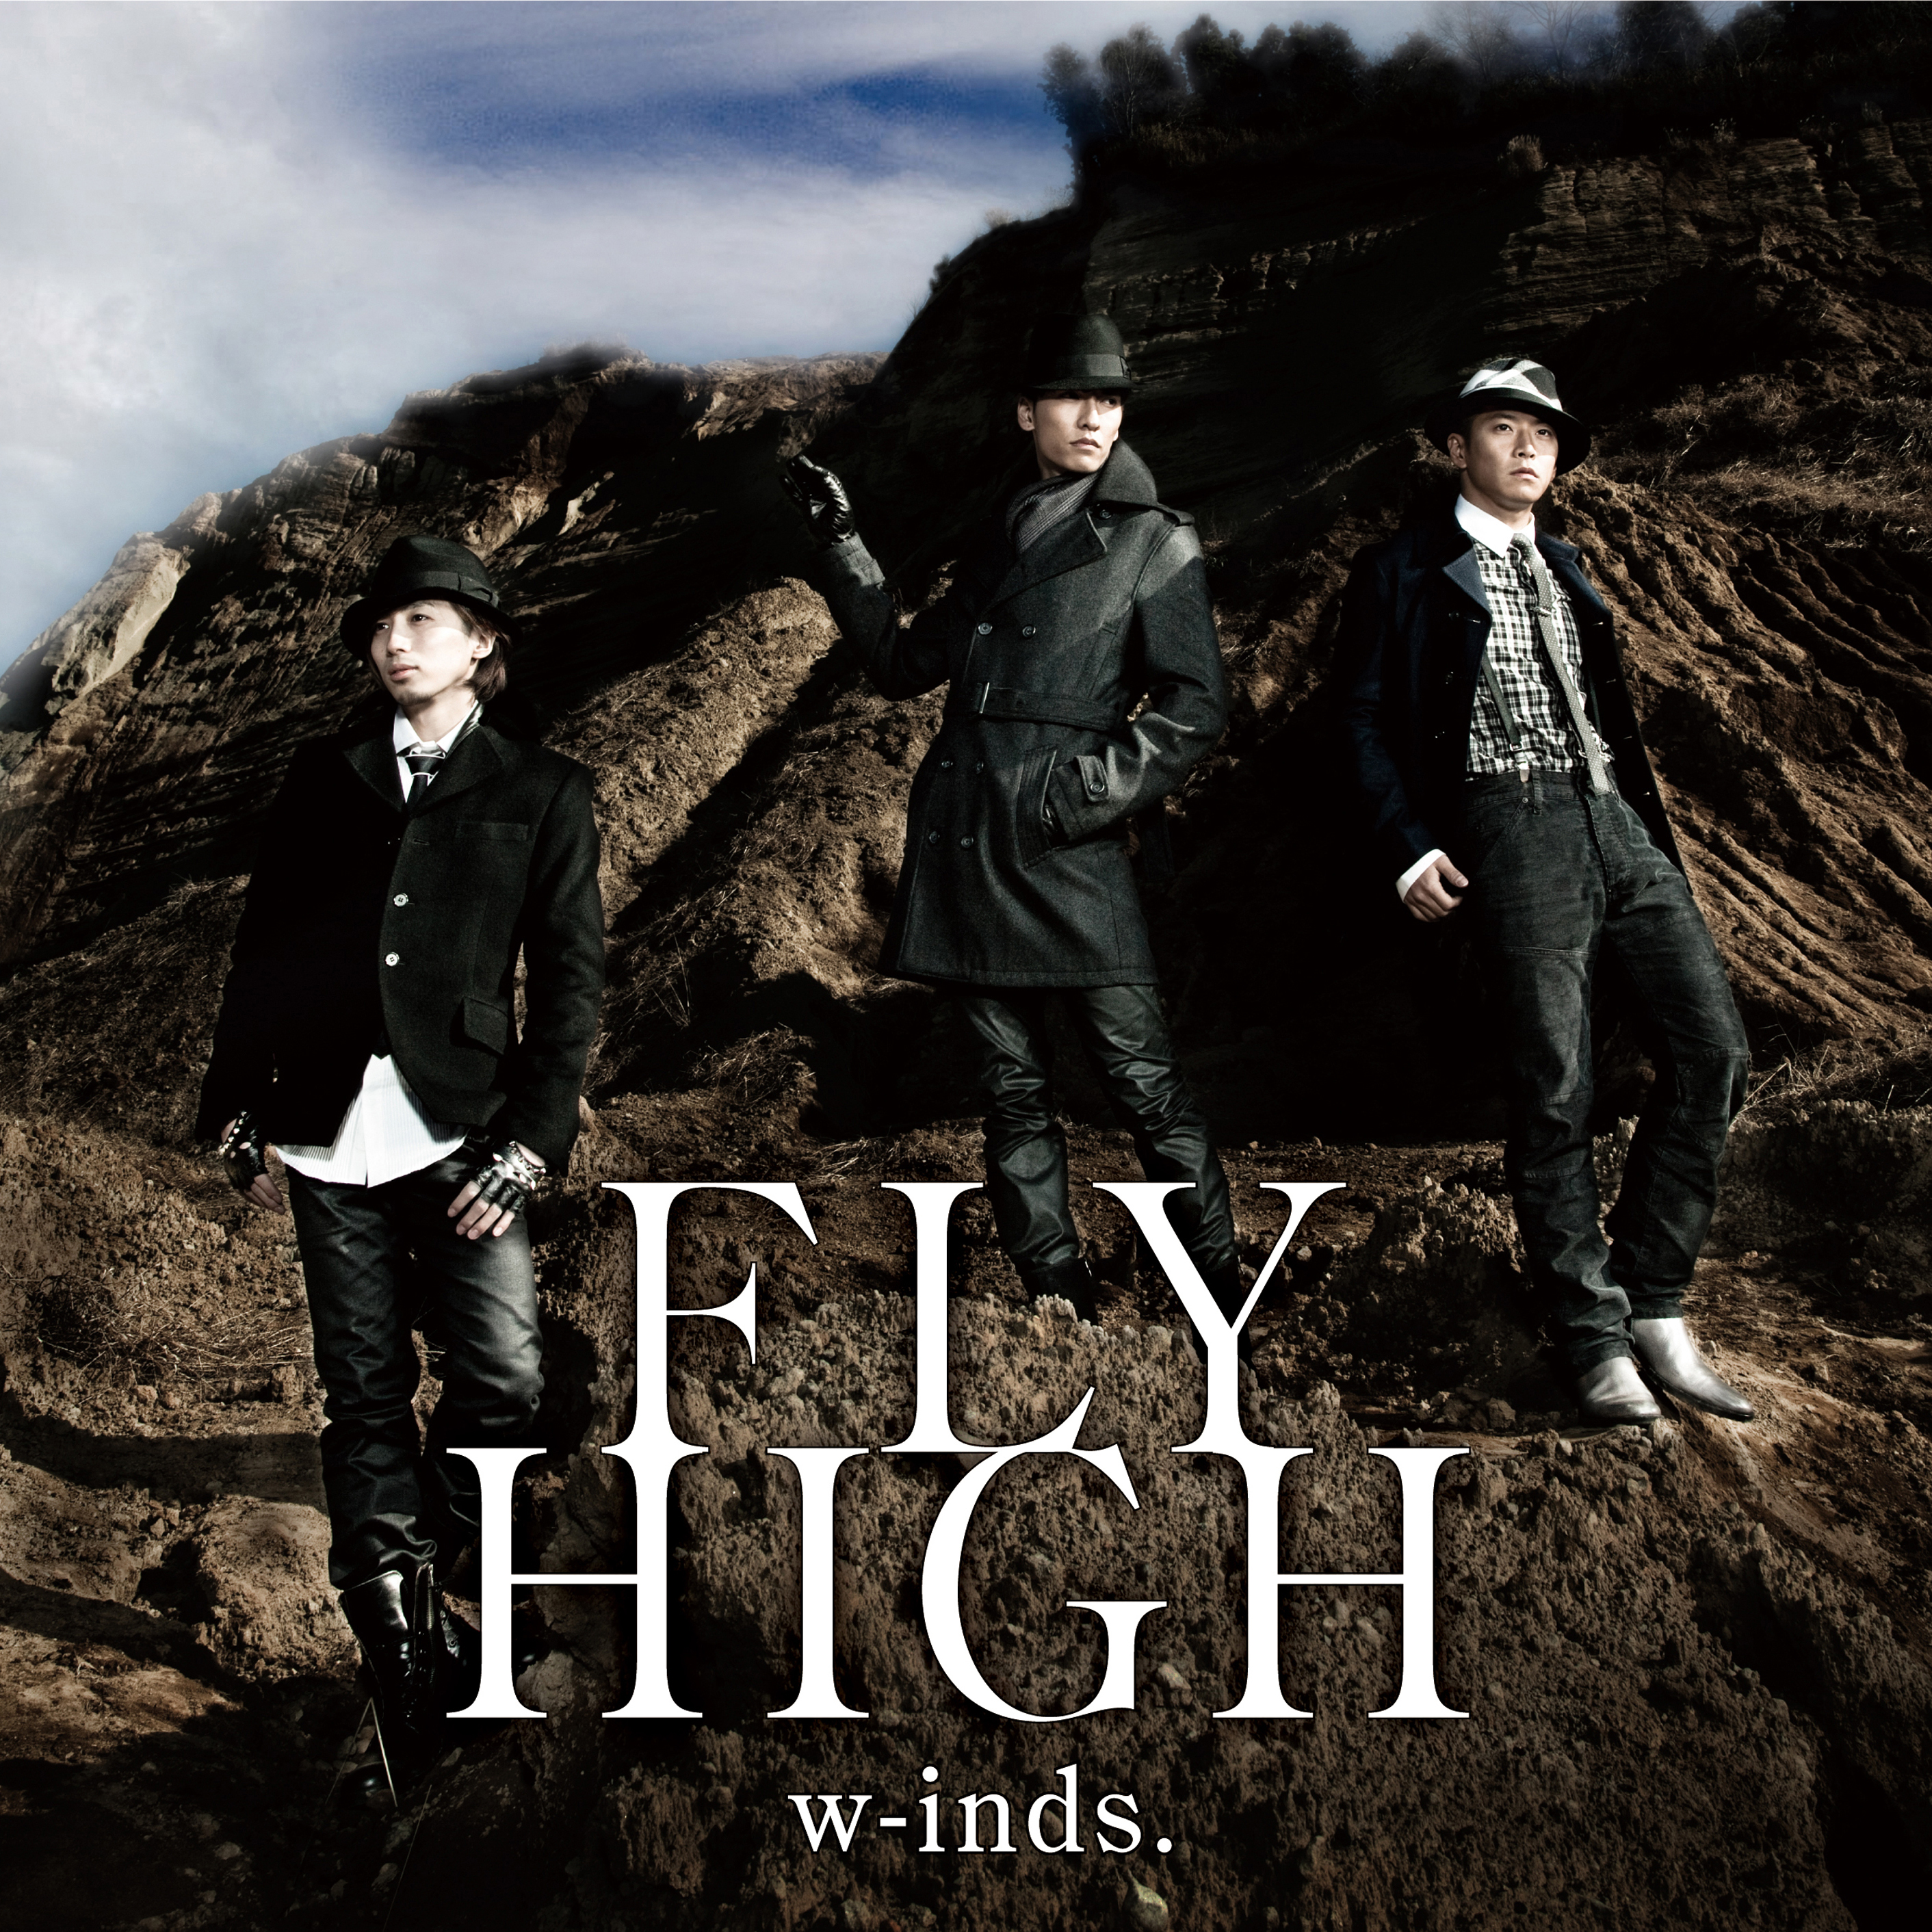 Most high first. W-inds. And one - High. Fly High 1. Fly High 1 2012.